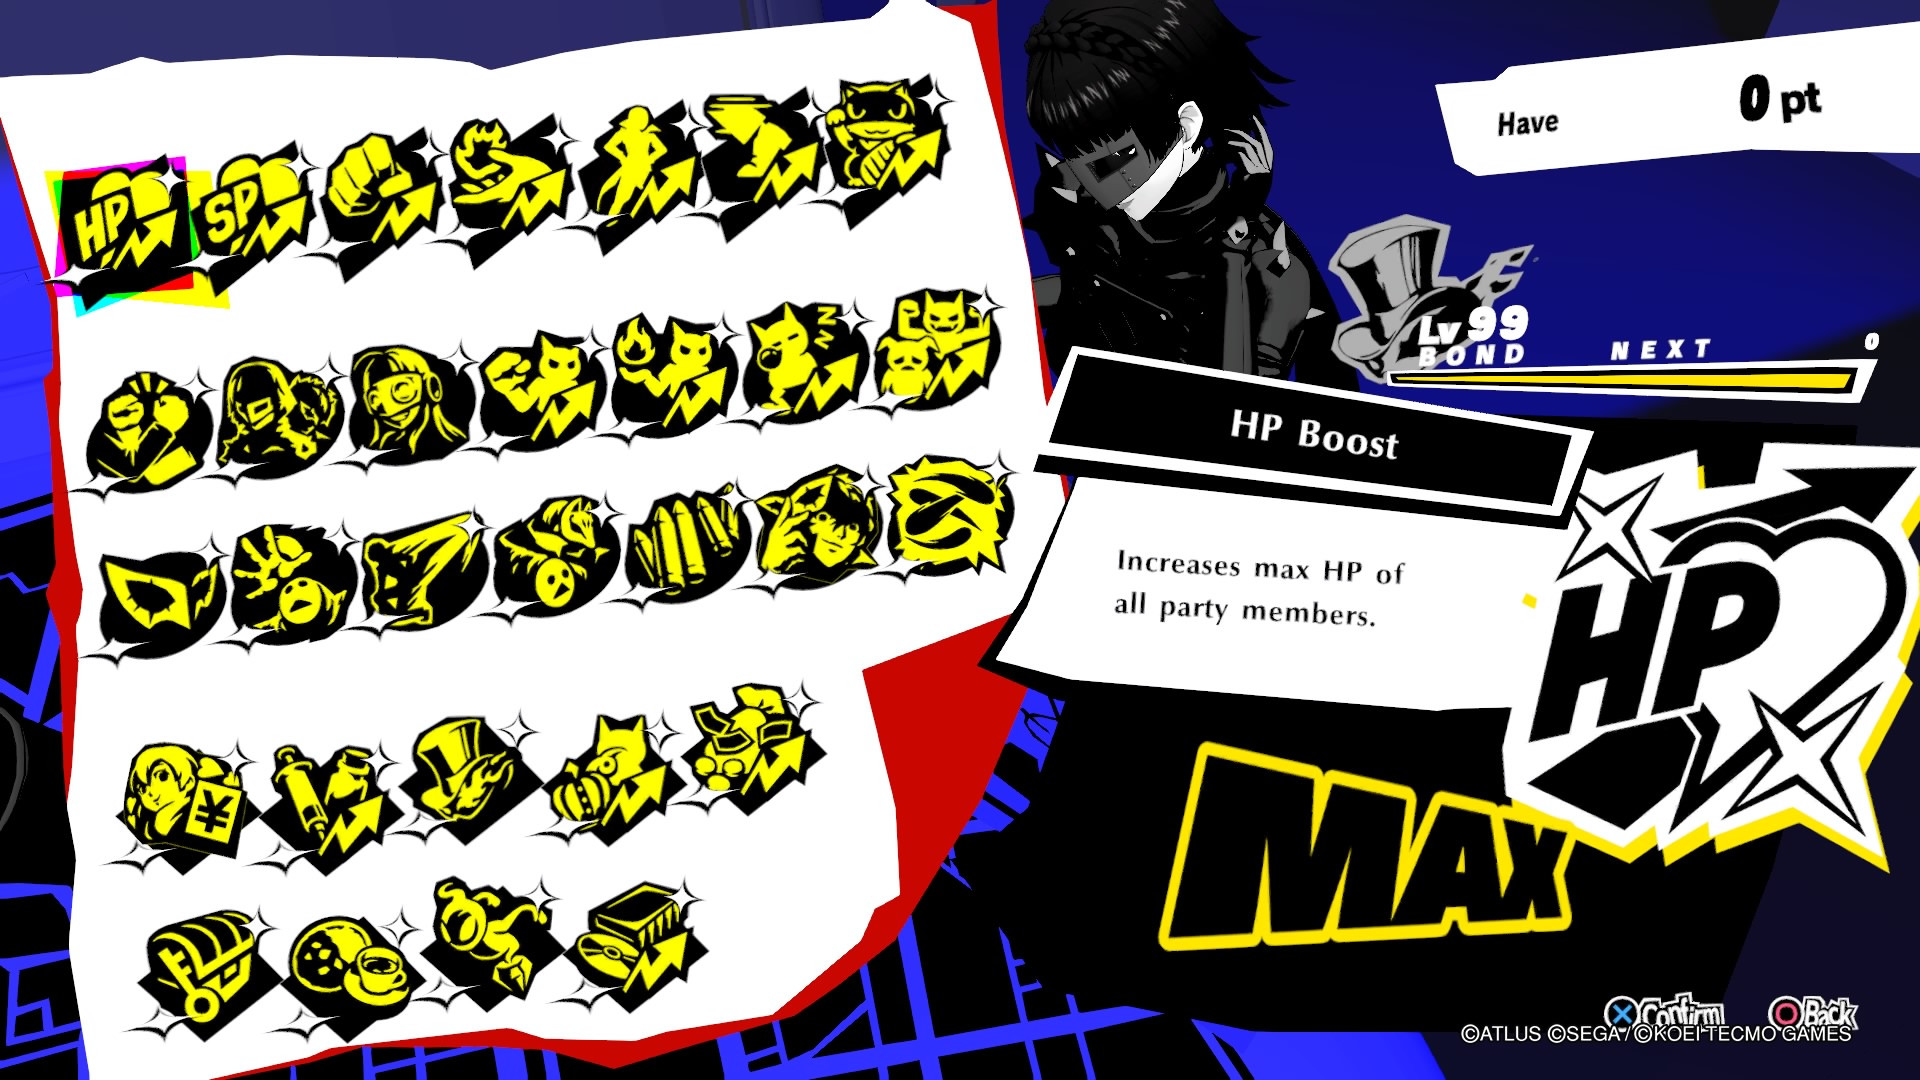 Persona 5 Royal Trophy Guide & Road Map